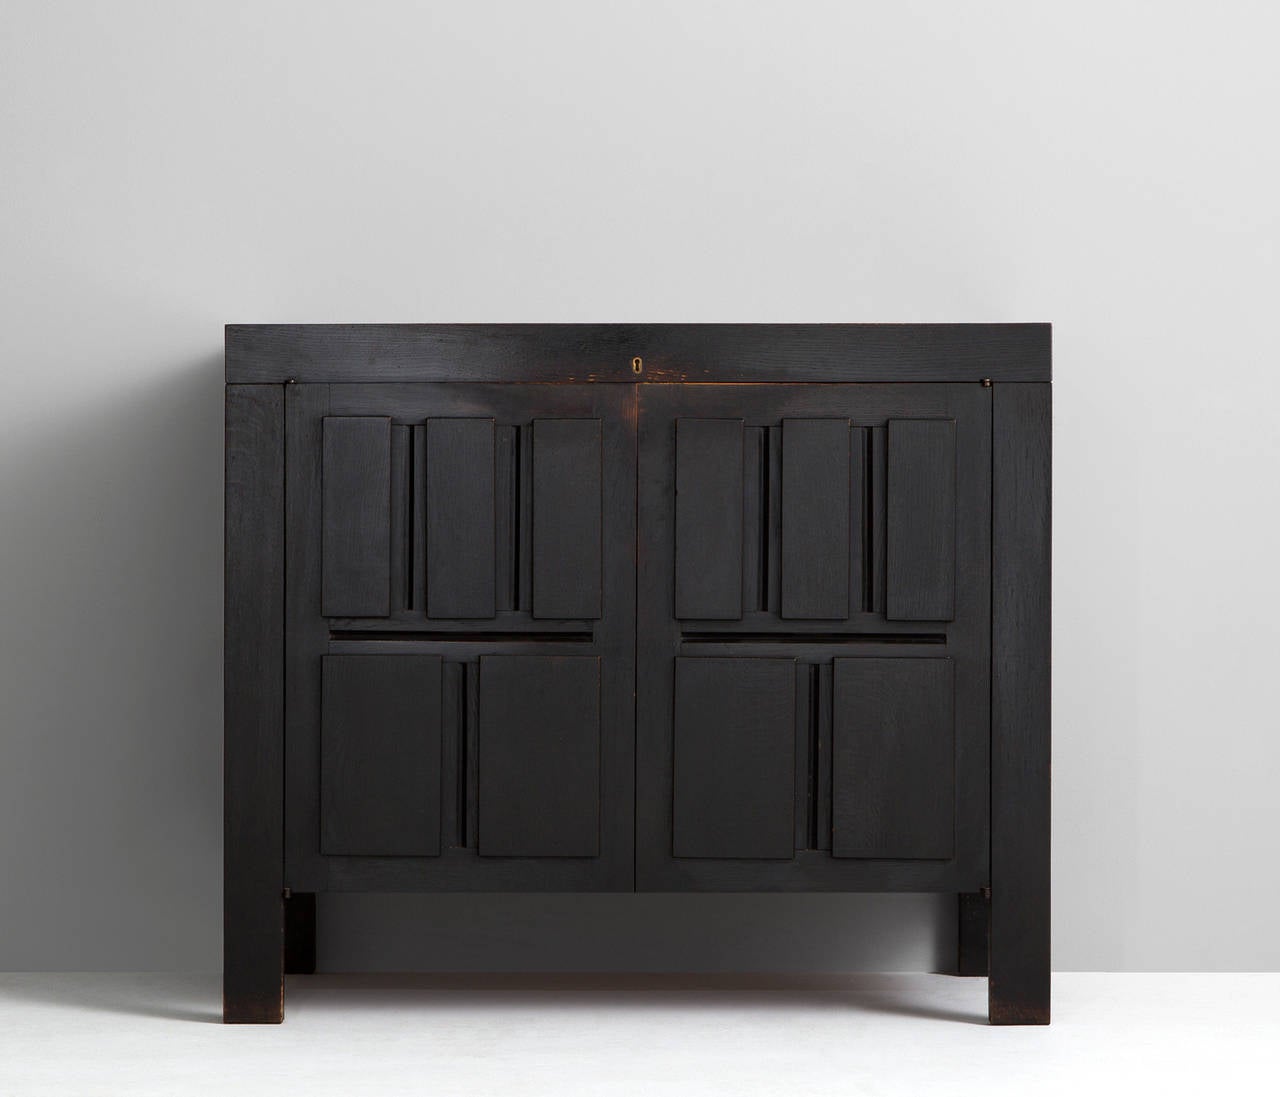 Sideboards, in stained wood, by De Coene, Belgium 1970s.

Very well designed graphic sideboard with dark brown stained finish designed by De Coene, Belgium. The mat dark brown finish is a perfect combination with the graphing panels because of the